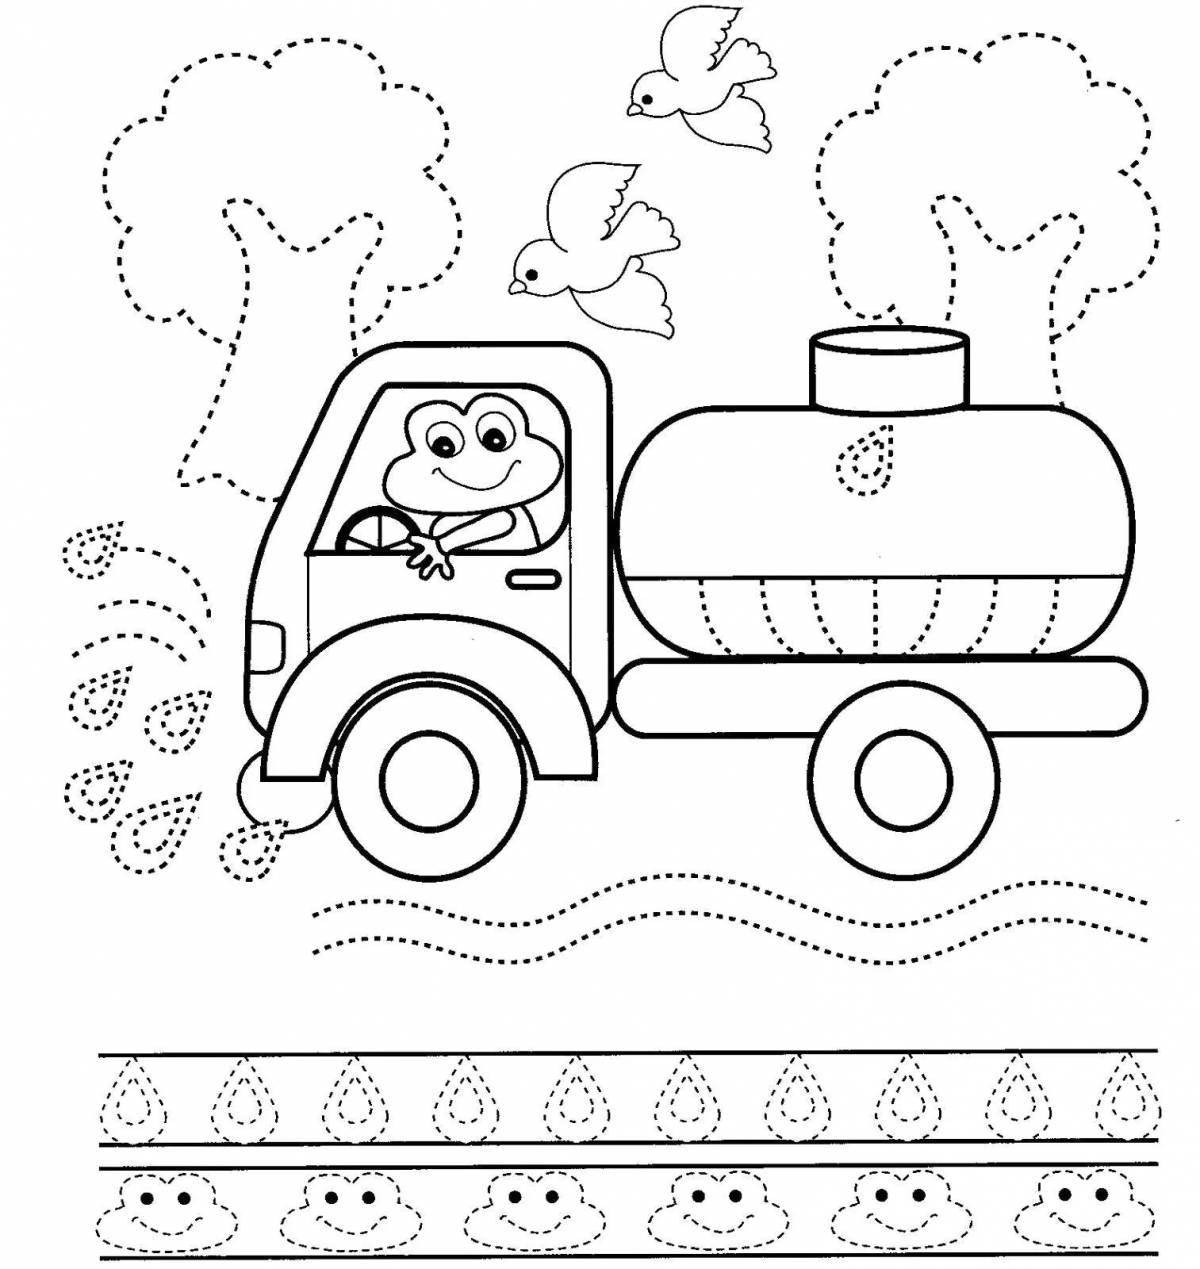 Fun coloring book for 6 year olds